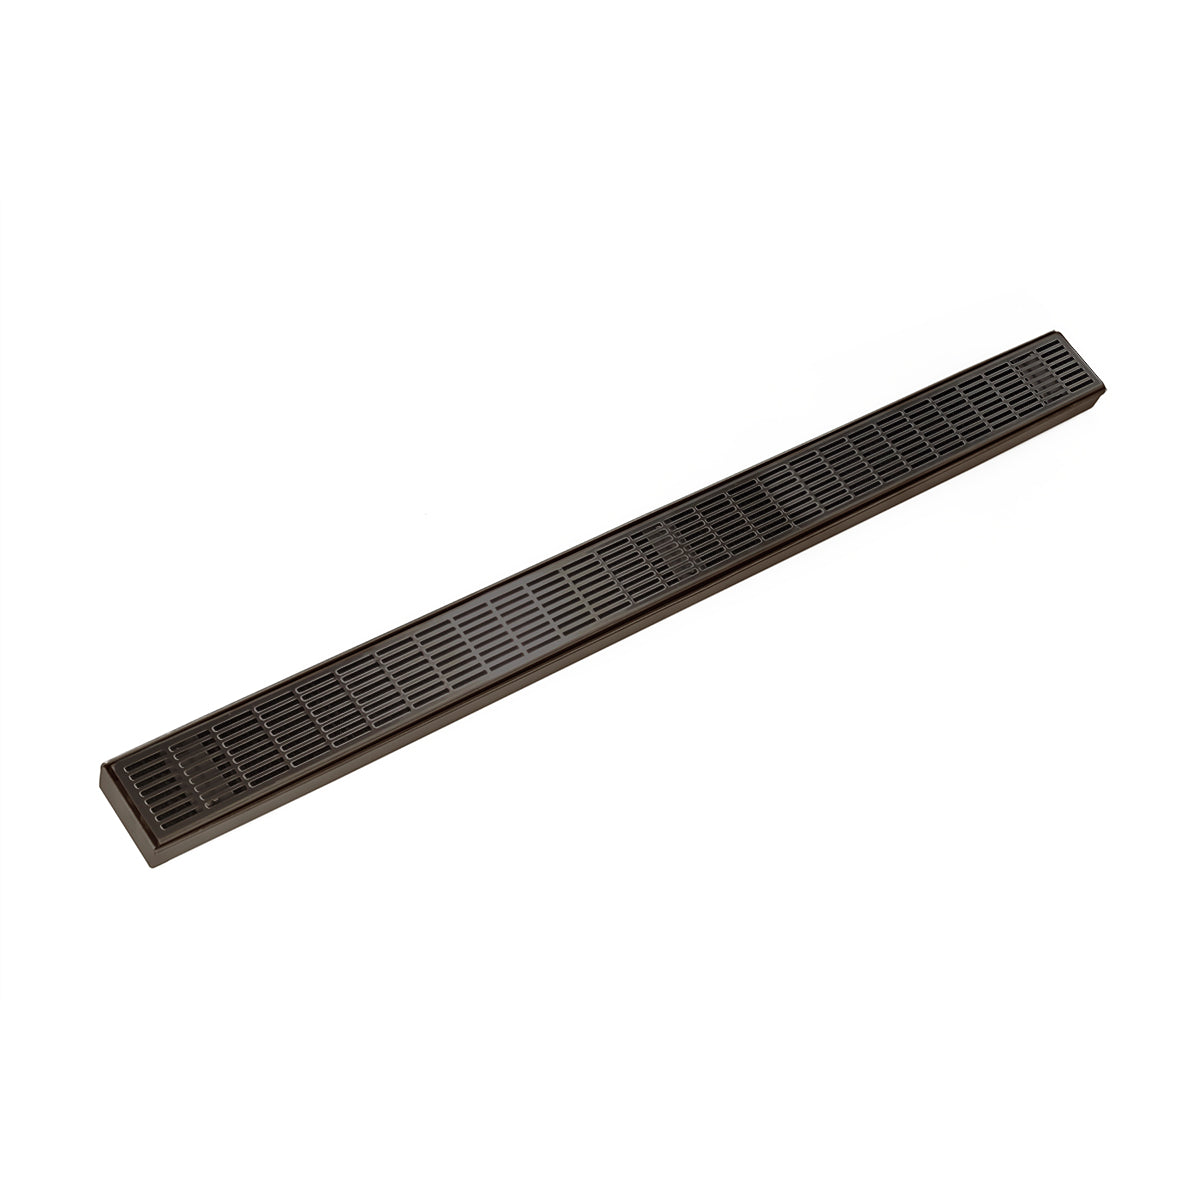 Infinity Drain 42" FX Series Fixed Length Linear Drain Kit with Perforated Slotted Grate